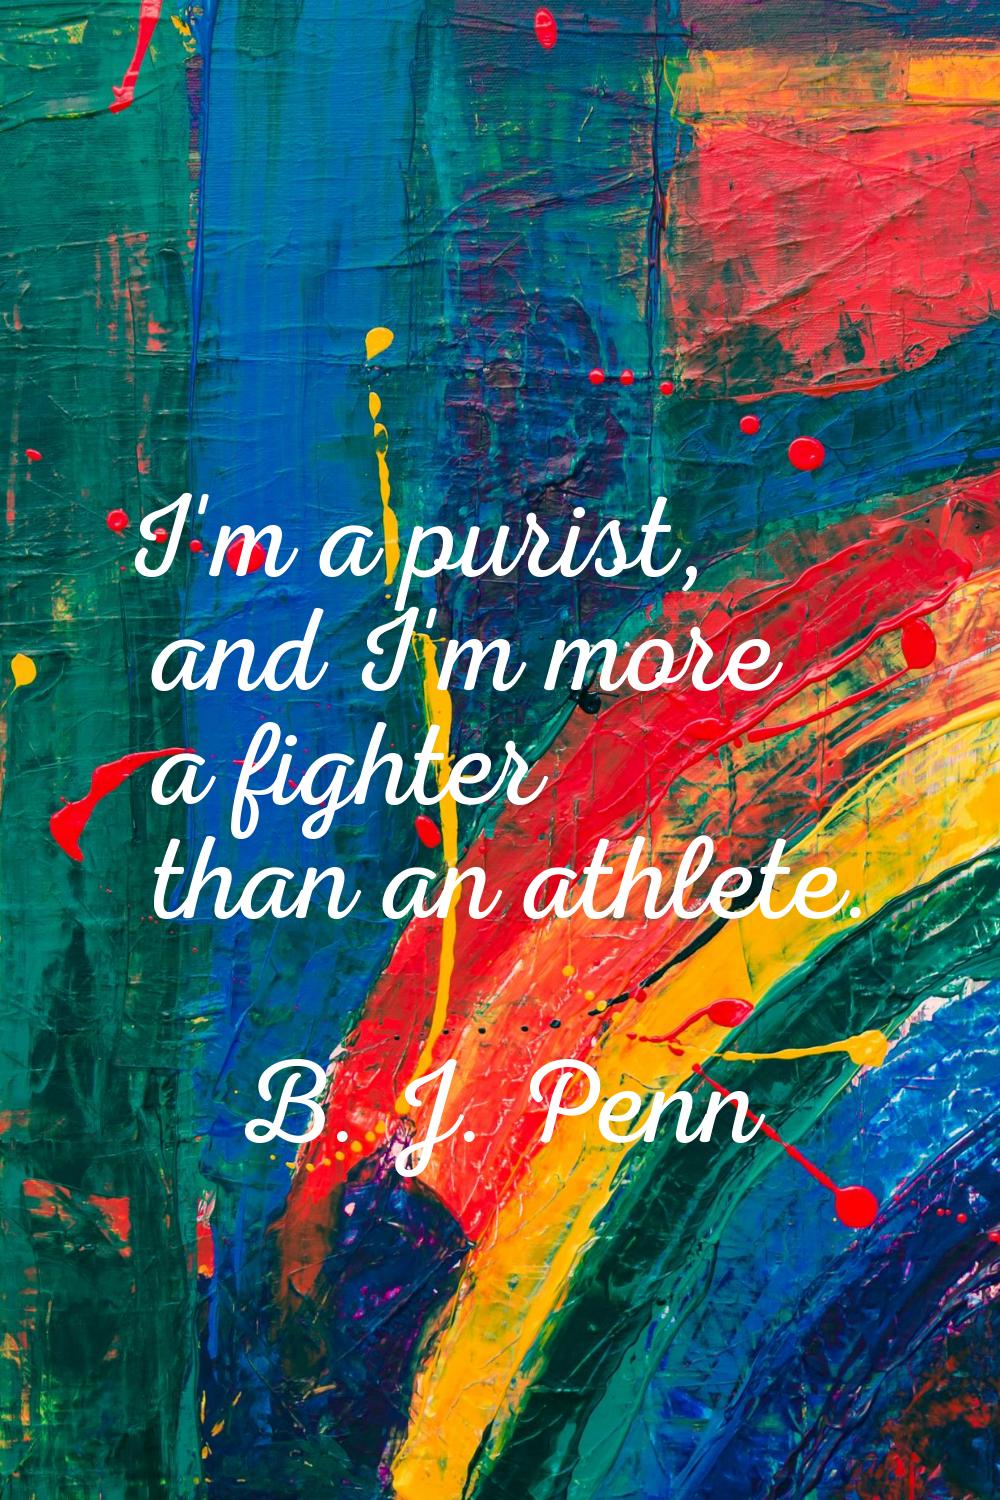 I'm a purist, and I'm more a fighter than an athlete.